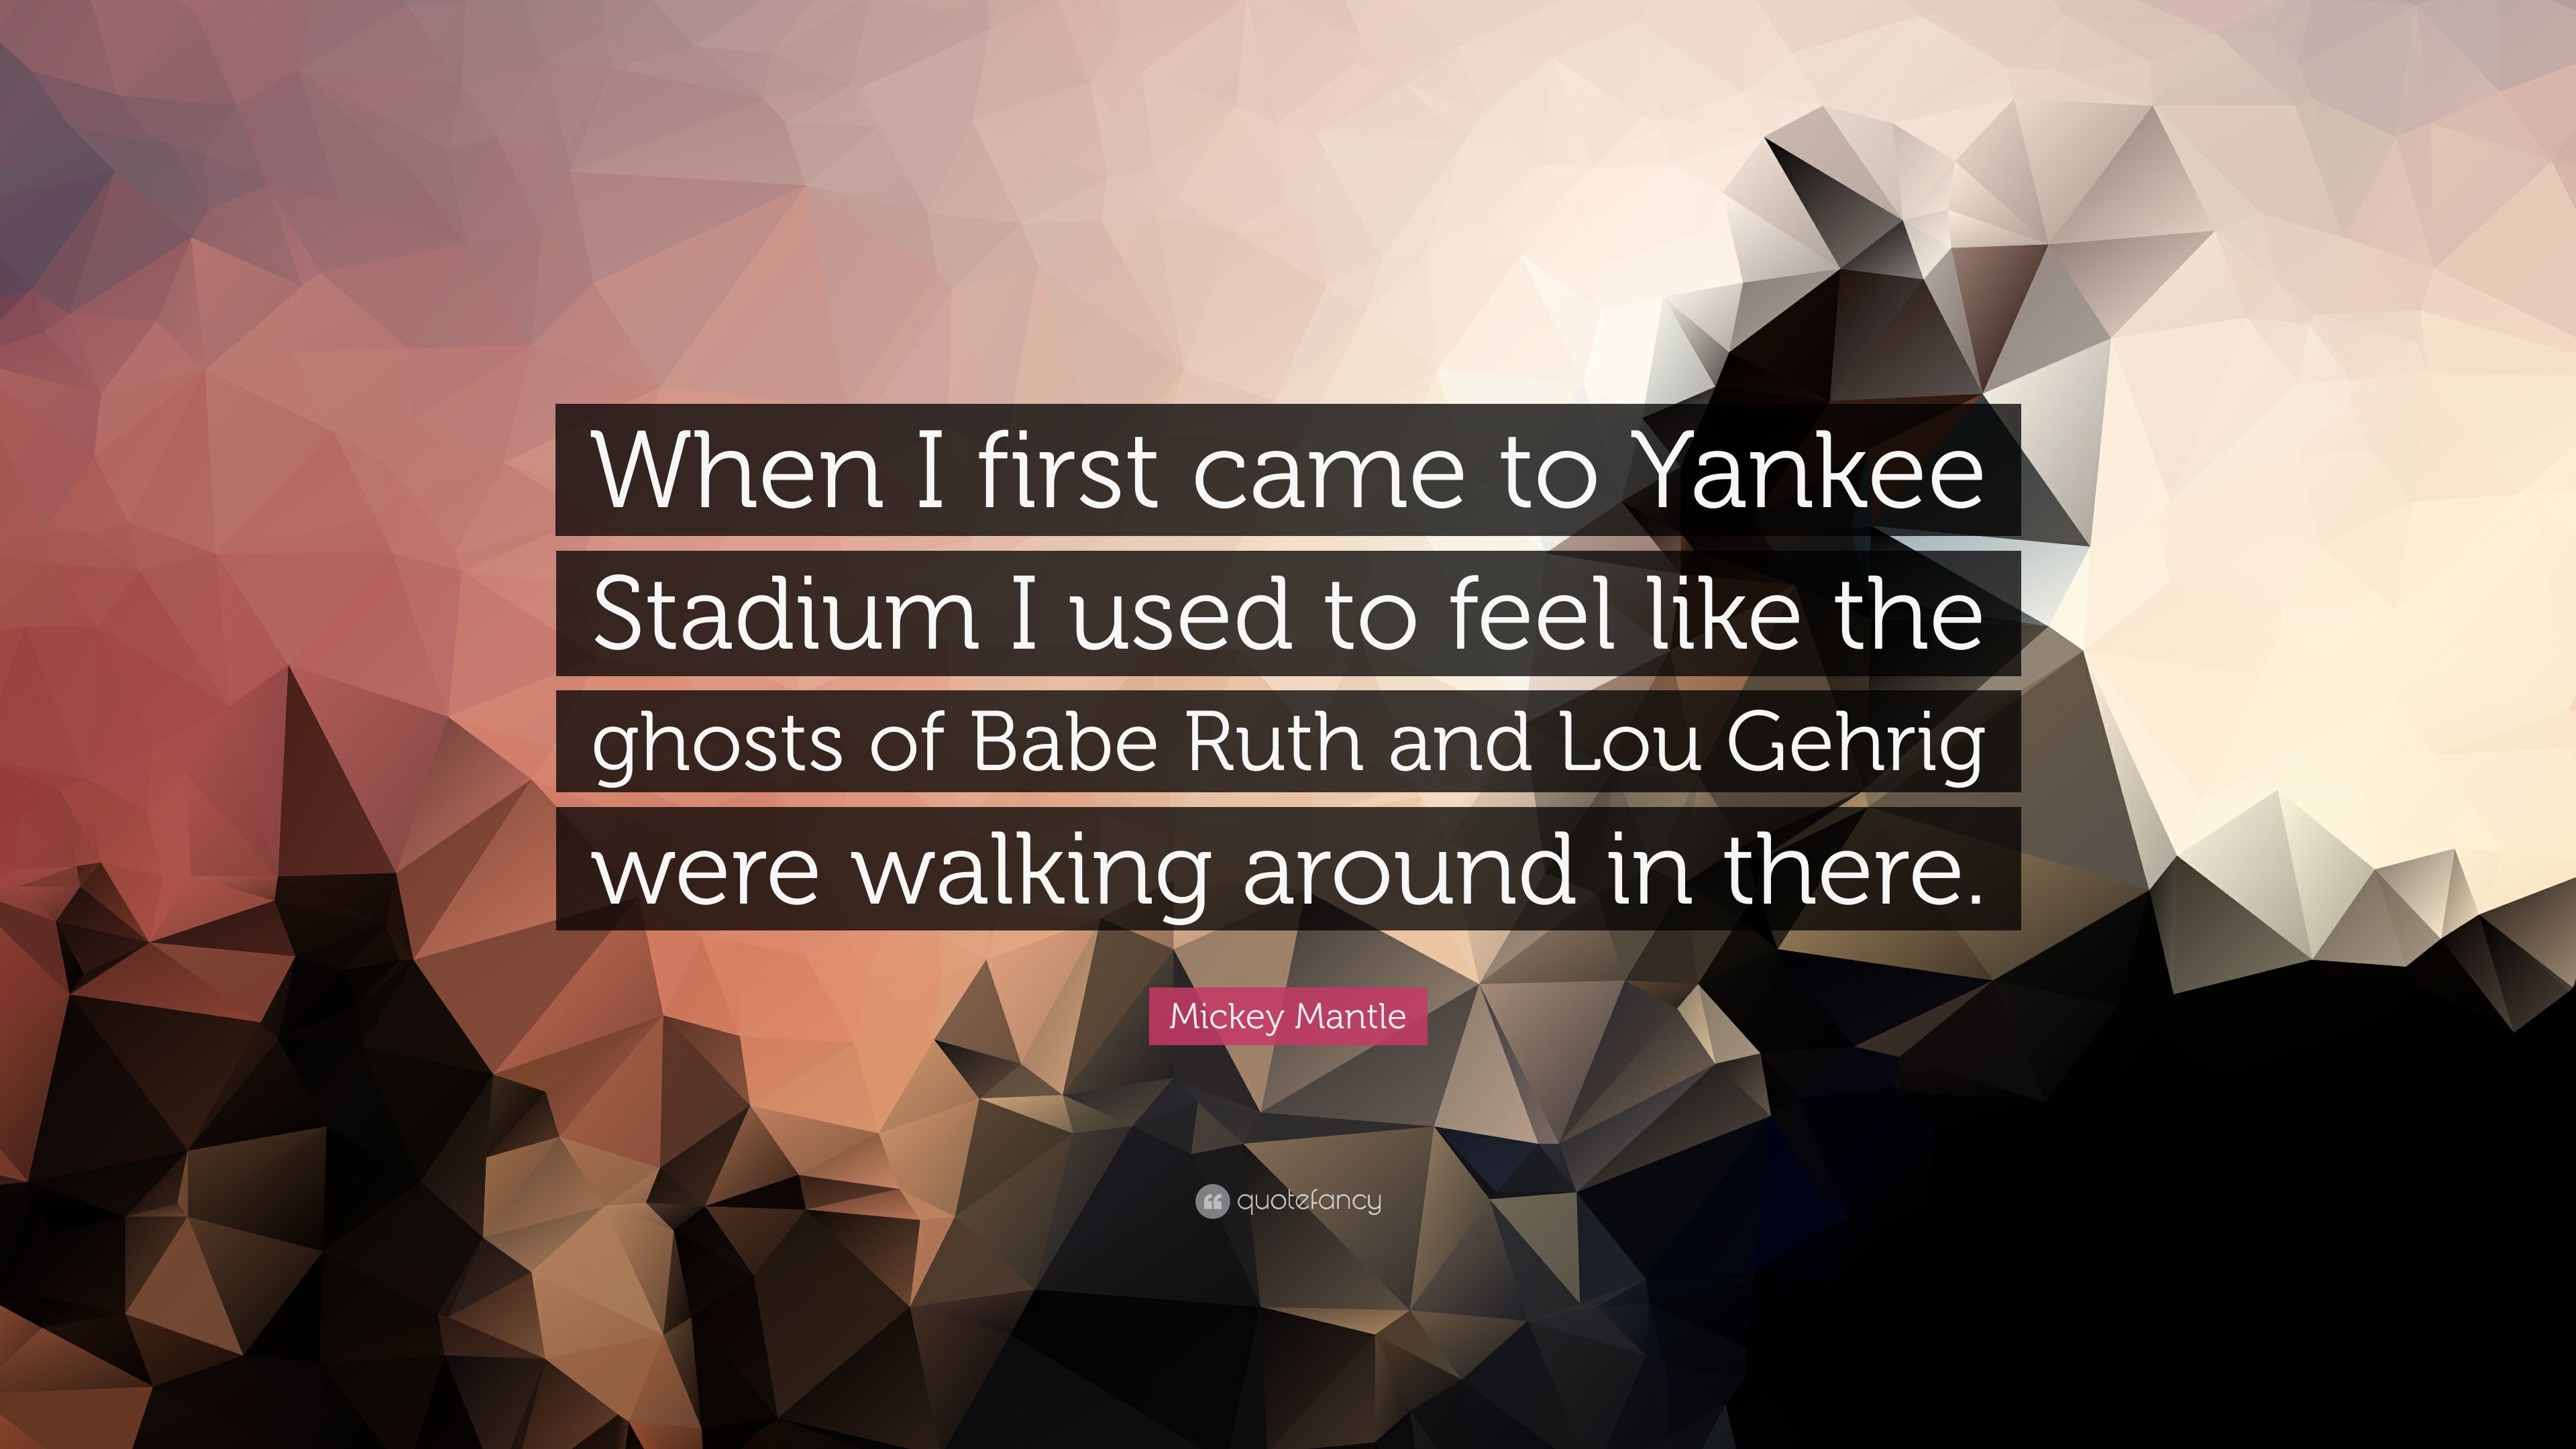 3840x2160 Mickey Mantle Quote: “When I first came to Yankee Stadium I used to feel